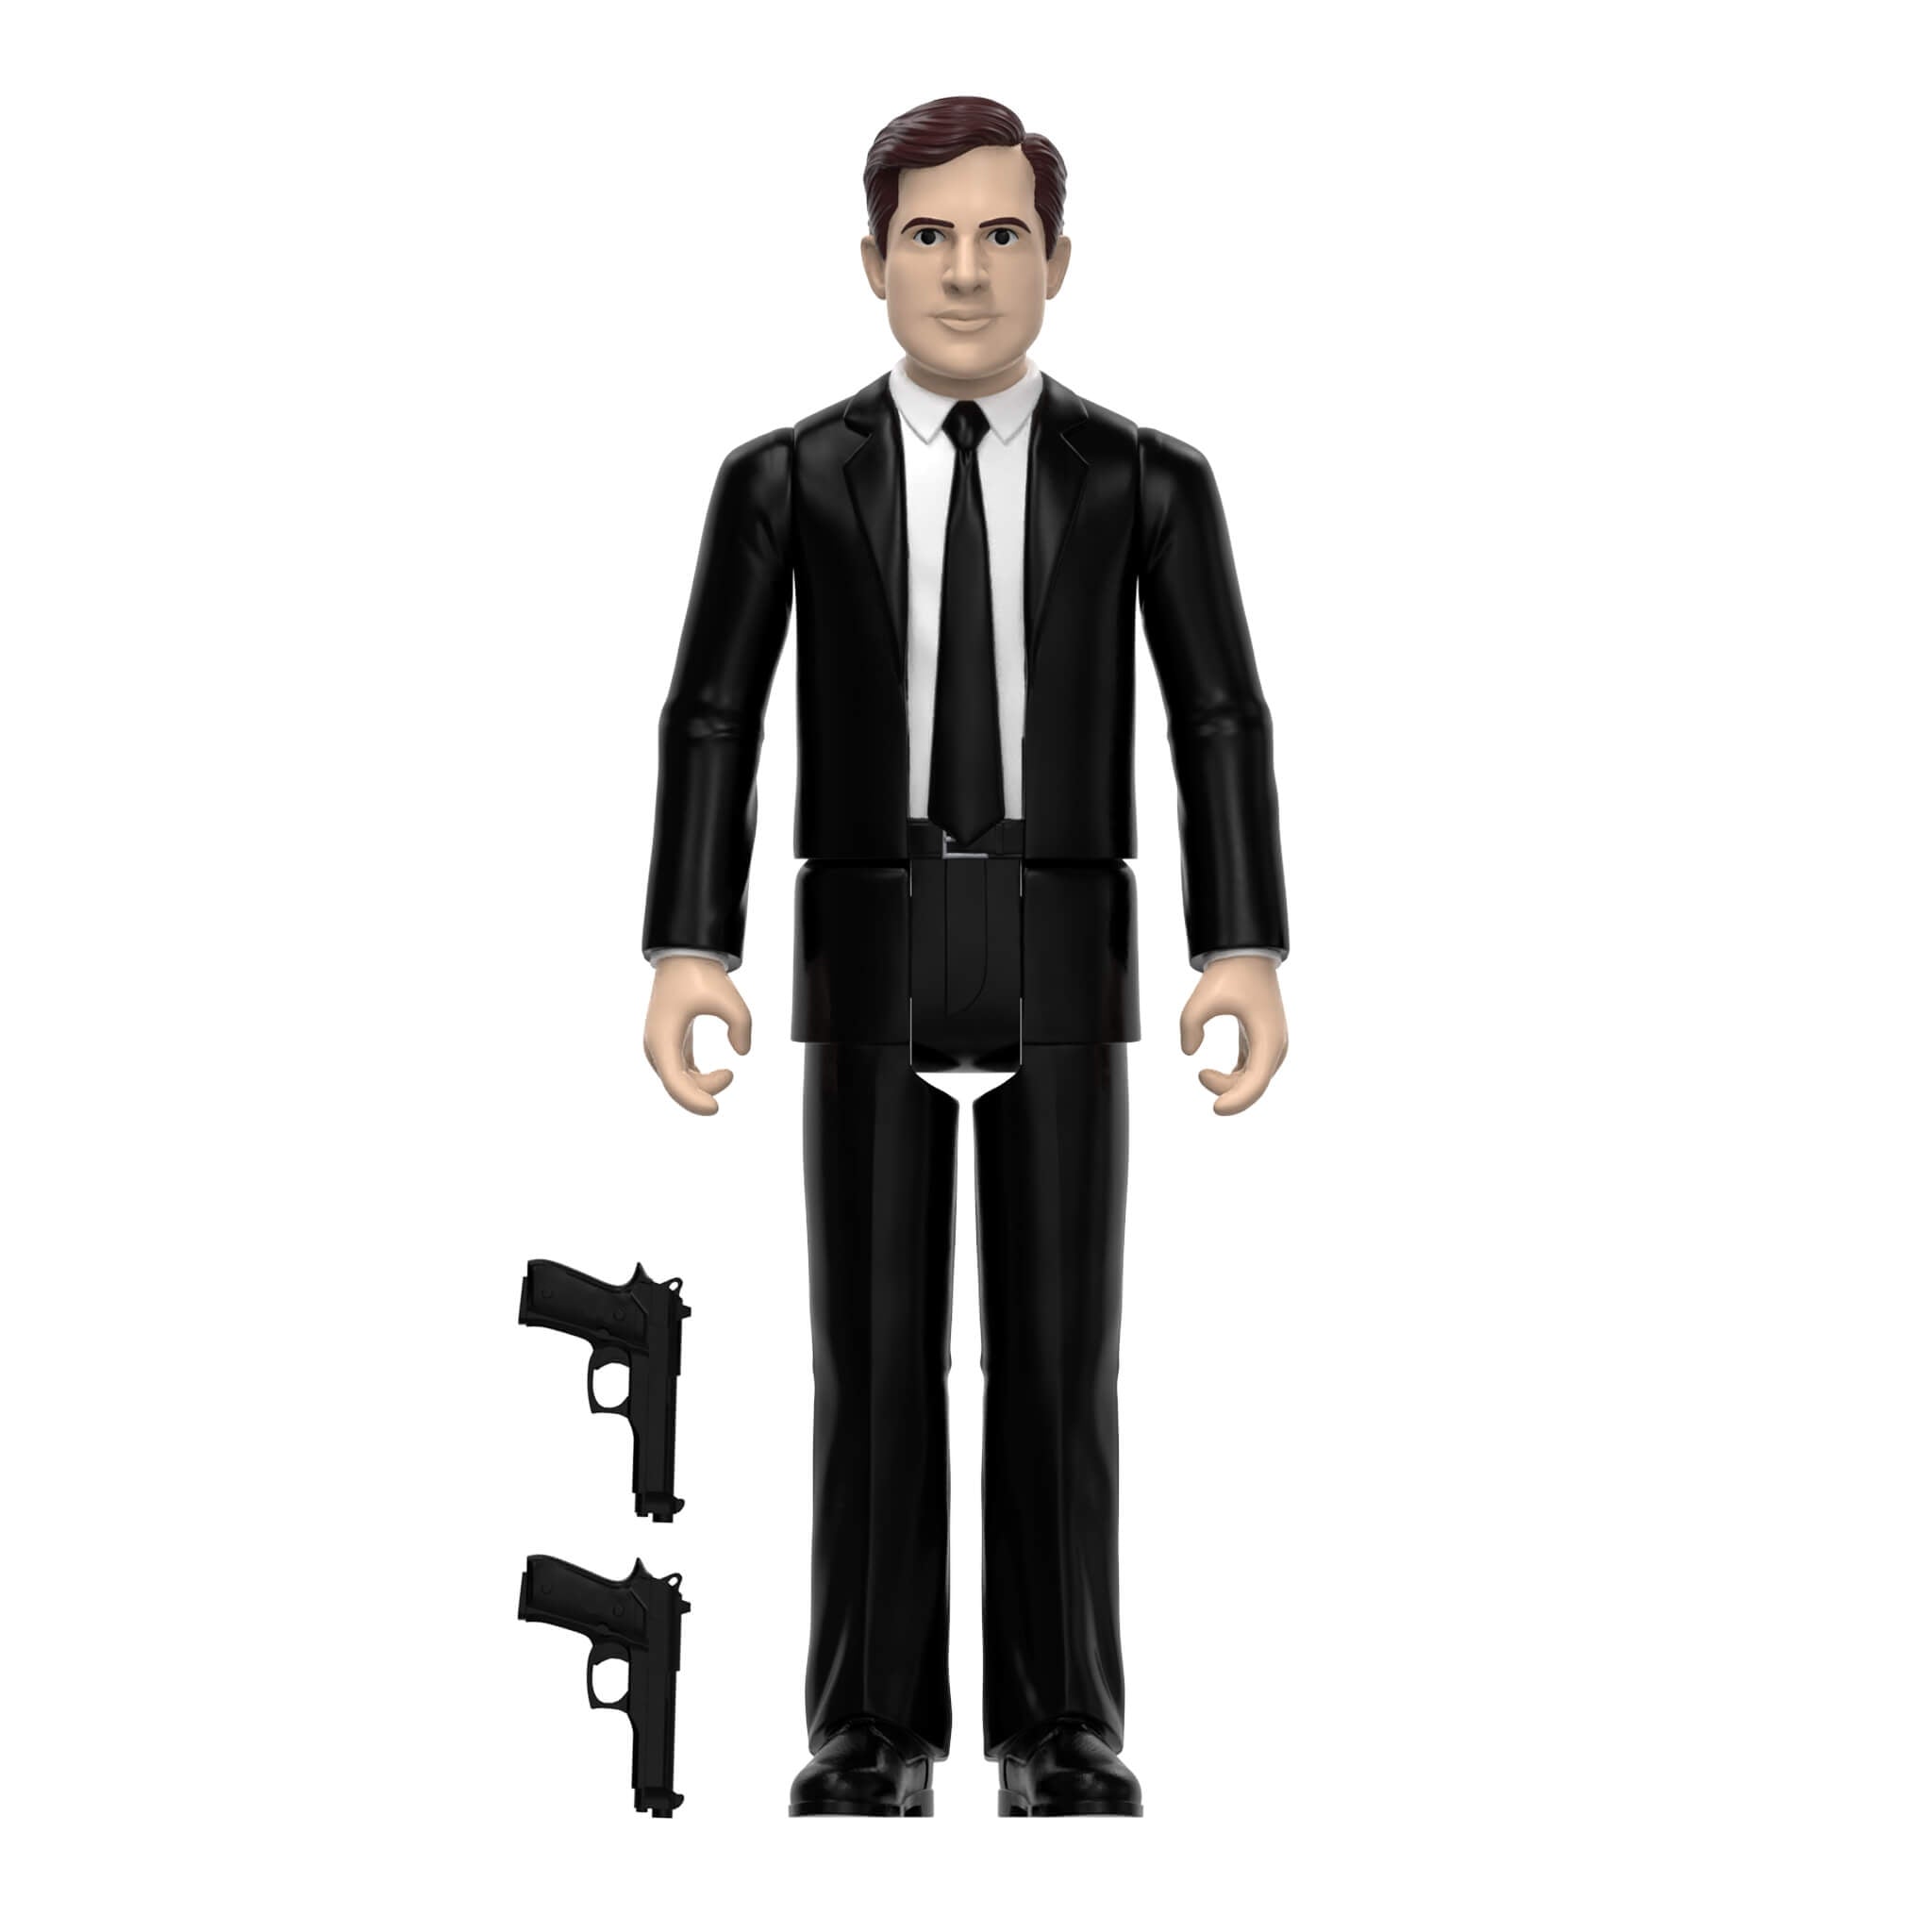 The Office ReAction Figures Wave 1 Threat Level Midnight - Set of 6